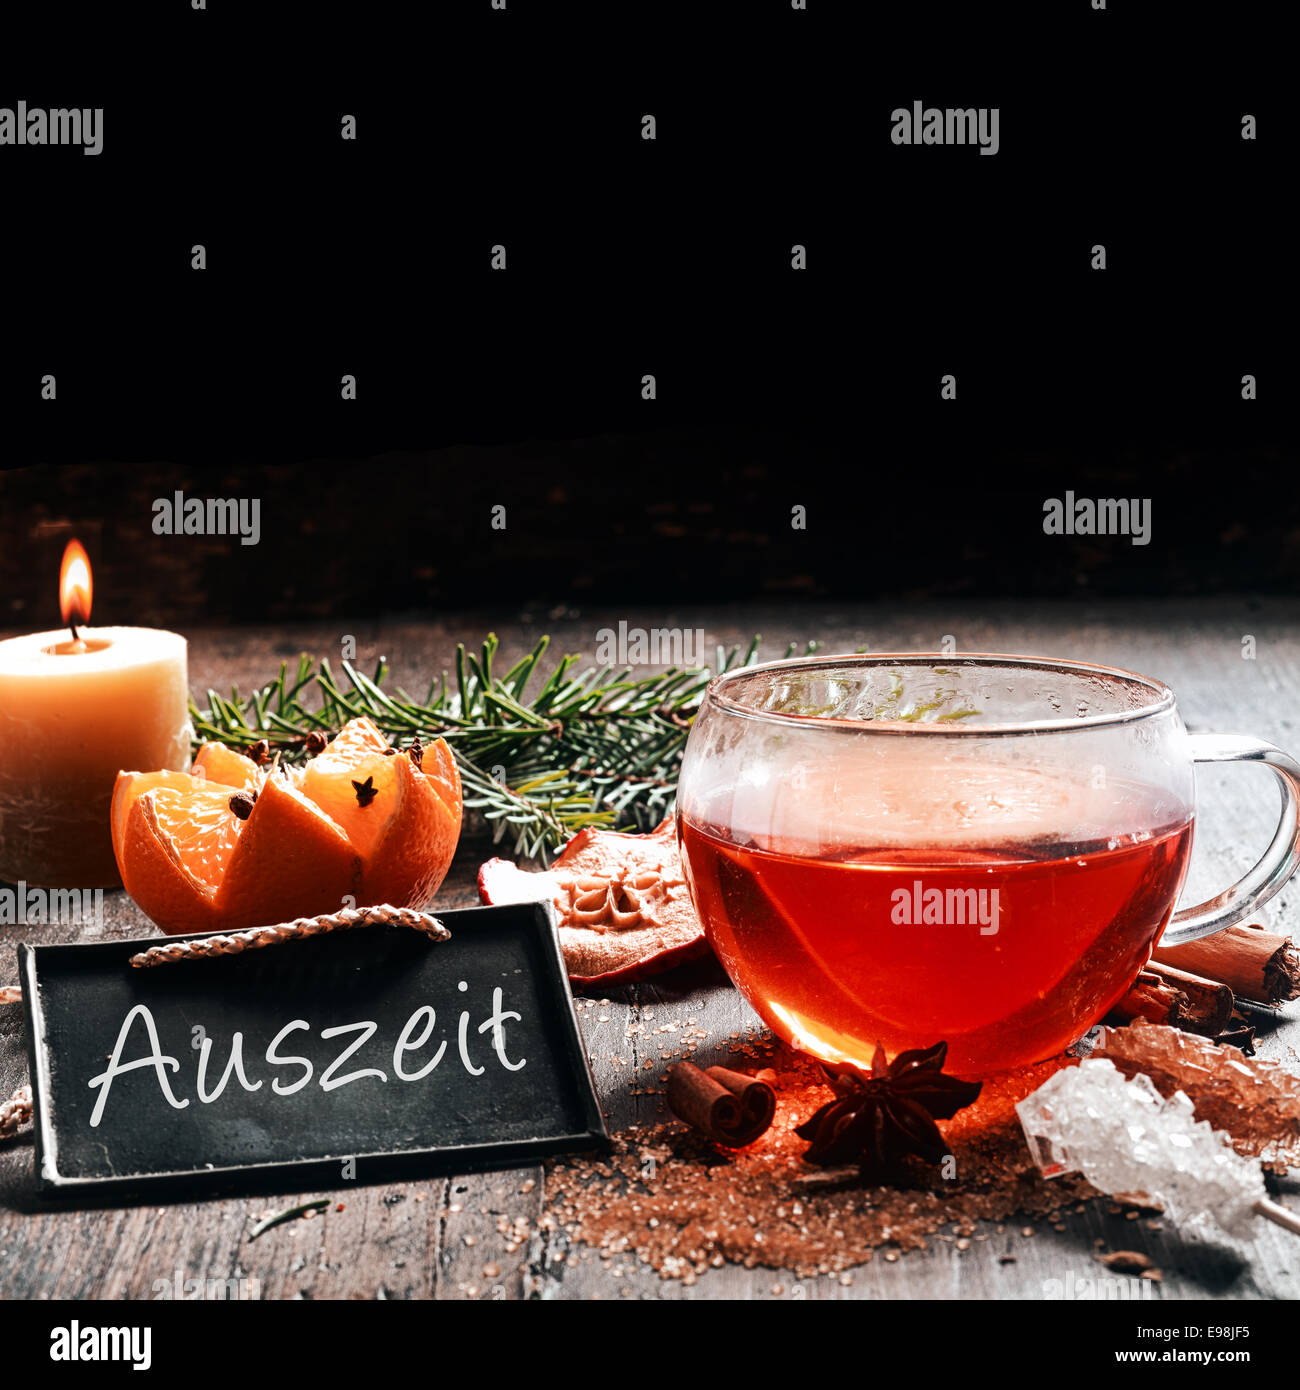 Mini Tag in Christmas Holiday Design, on Vintage Table. Stock Photo